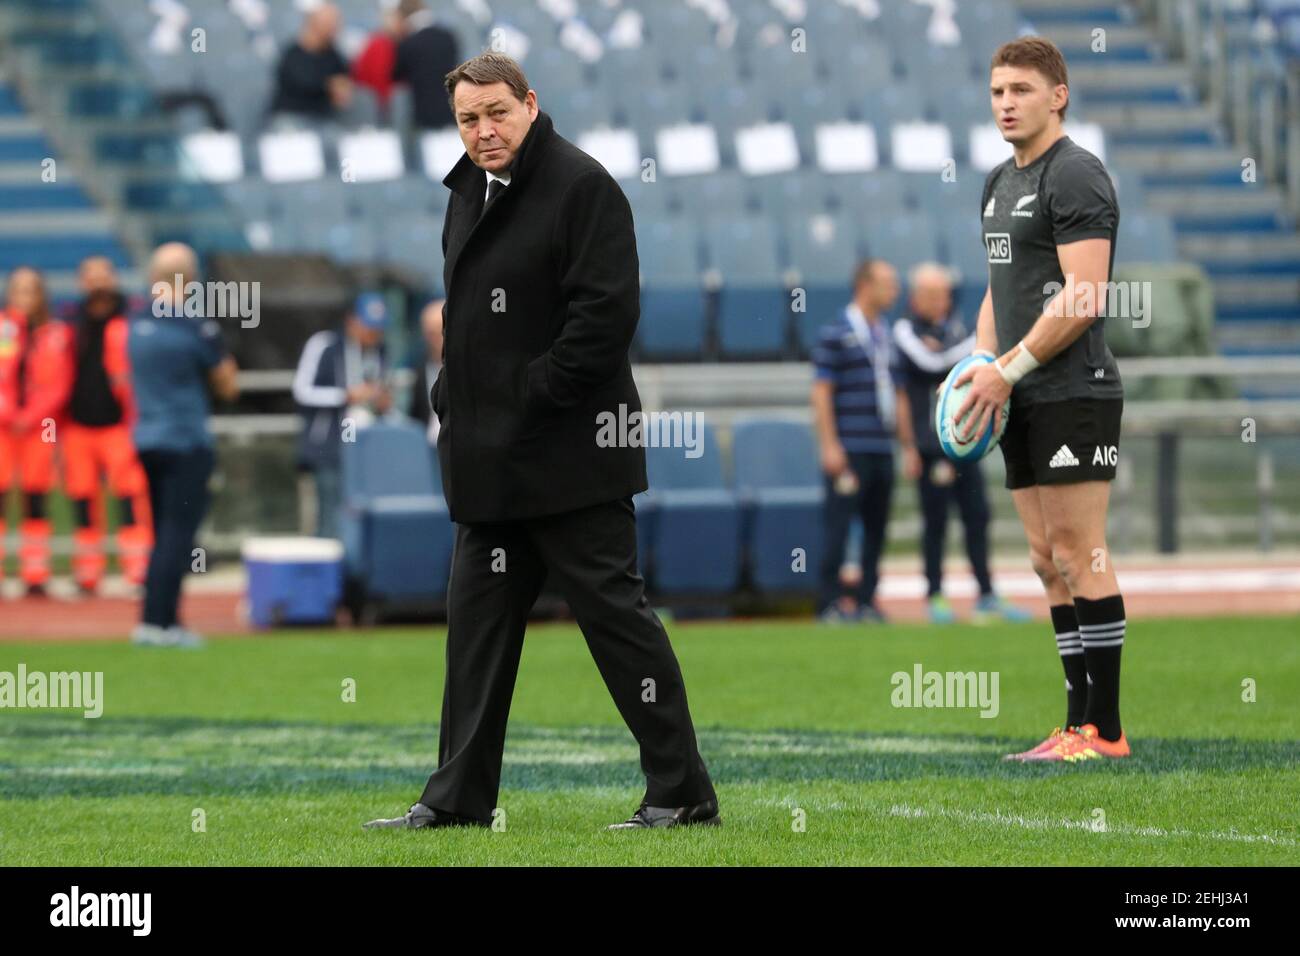 Rugby Union - Italy v New Zealand - Stadio Olimpico, Rome, Italy - November 24, 2018  New Zealand head coach Steve Hansen during the warm up before the match   REUTERS/Alessandro Bianchi Stock Photo